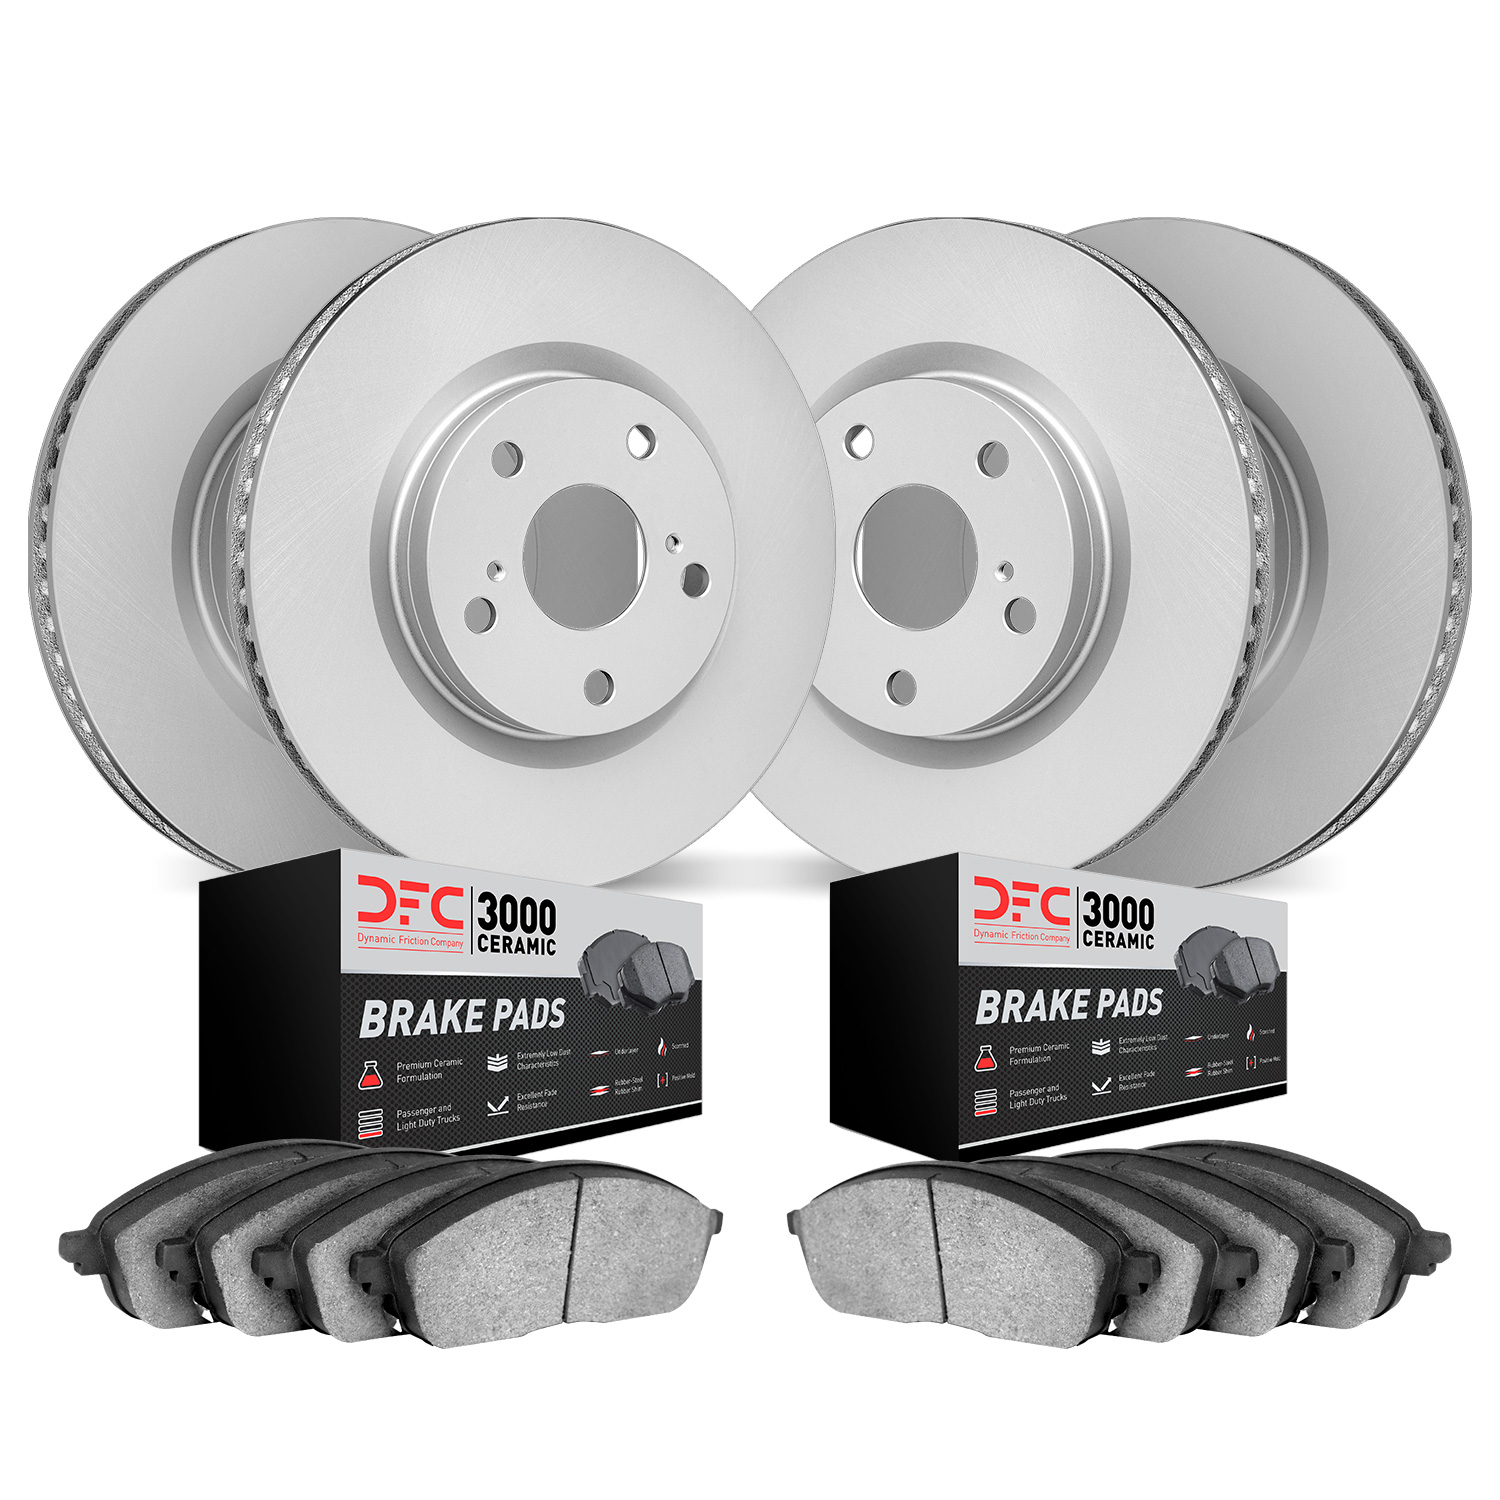 4304-75006 Geospec Brake Rotors with 3000-Series Ceramic Brake Pads Kit, 2001-2006 Lexus/Toyota/Scion, Position: Front and Rear